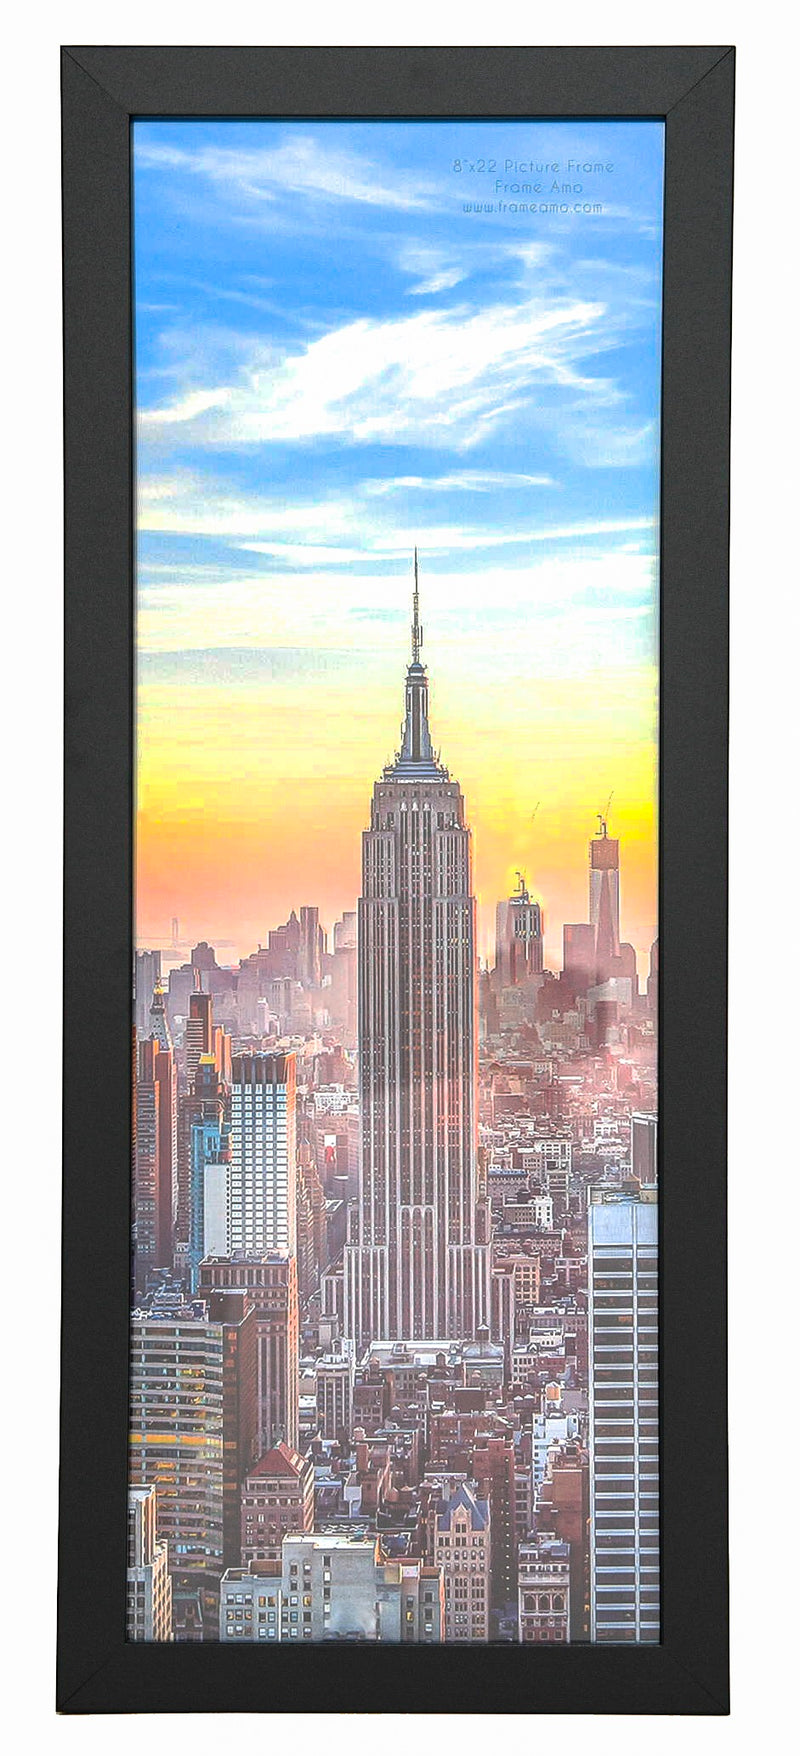 8x22 Black Modern Picture or Poster Frame, 1 inch Wide Border, Acrylic Front